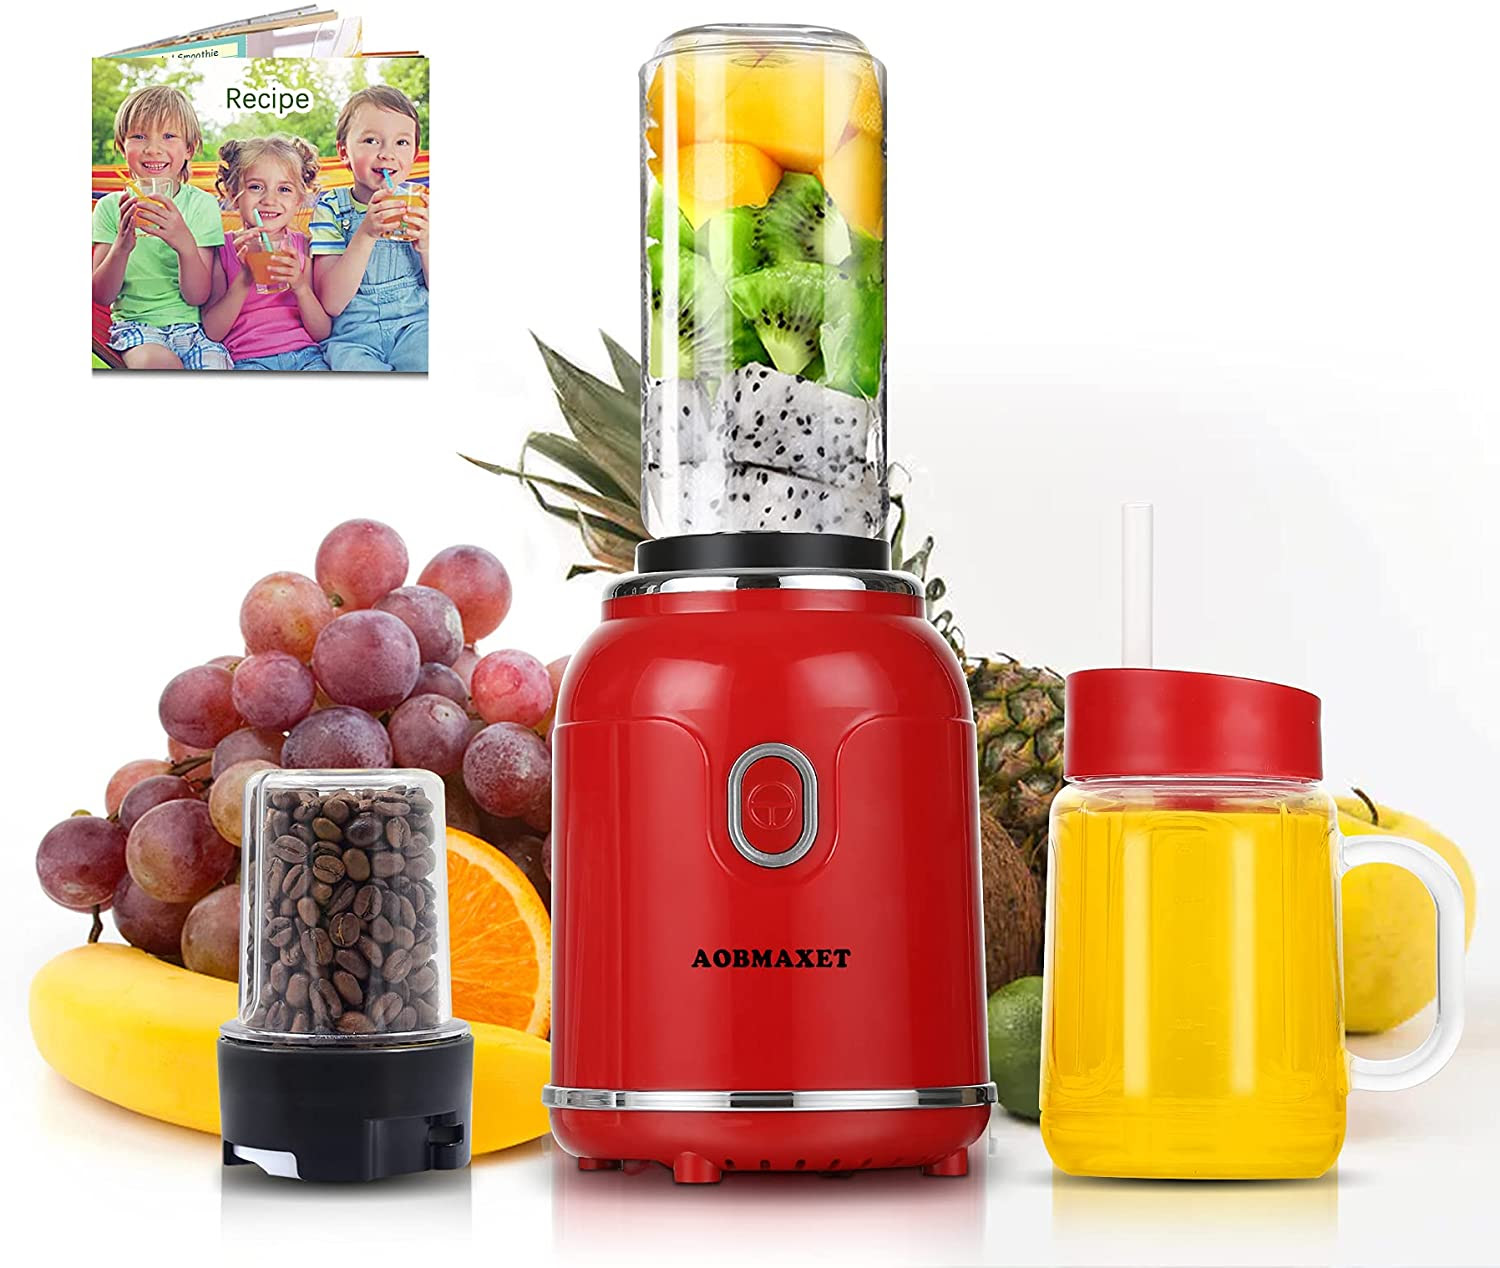 AOBMAXET Smoothie Blender. 500units. EXW Los Angeles